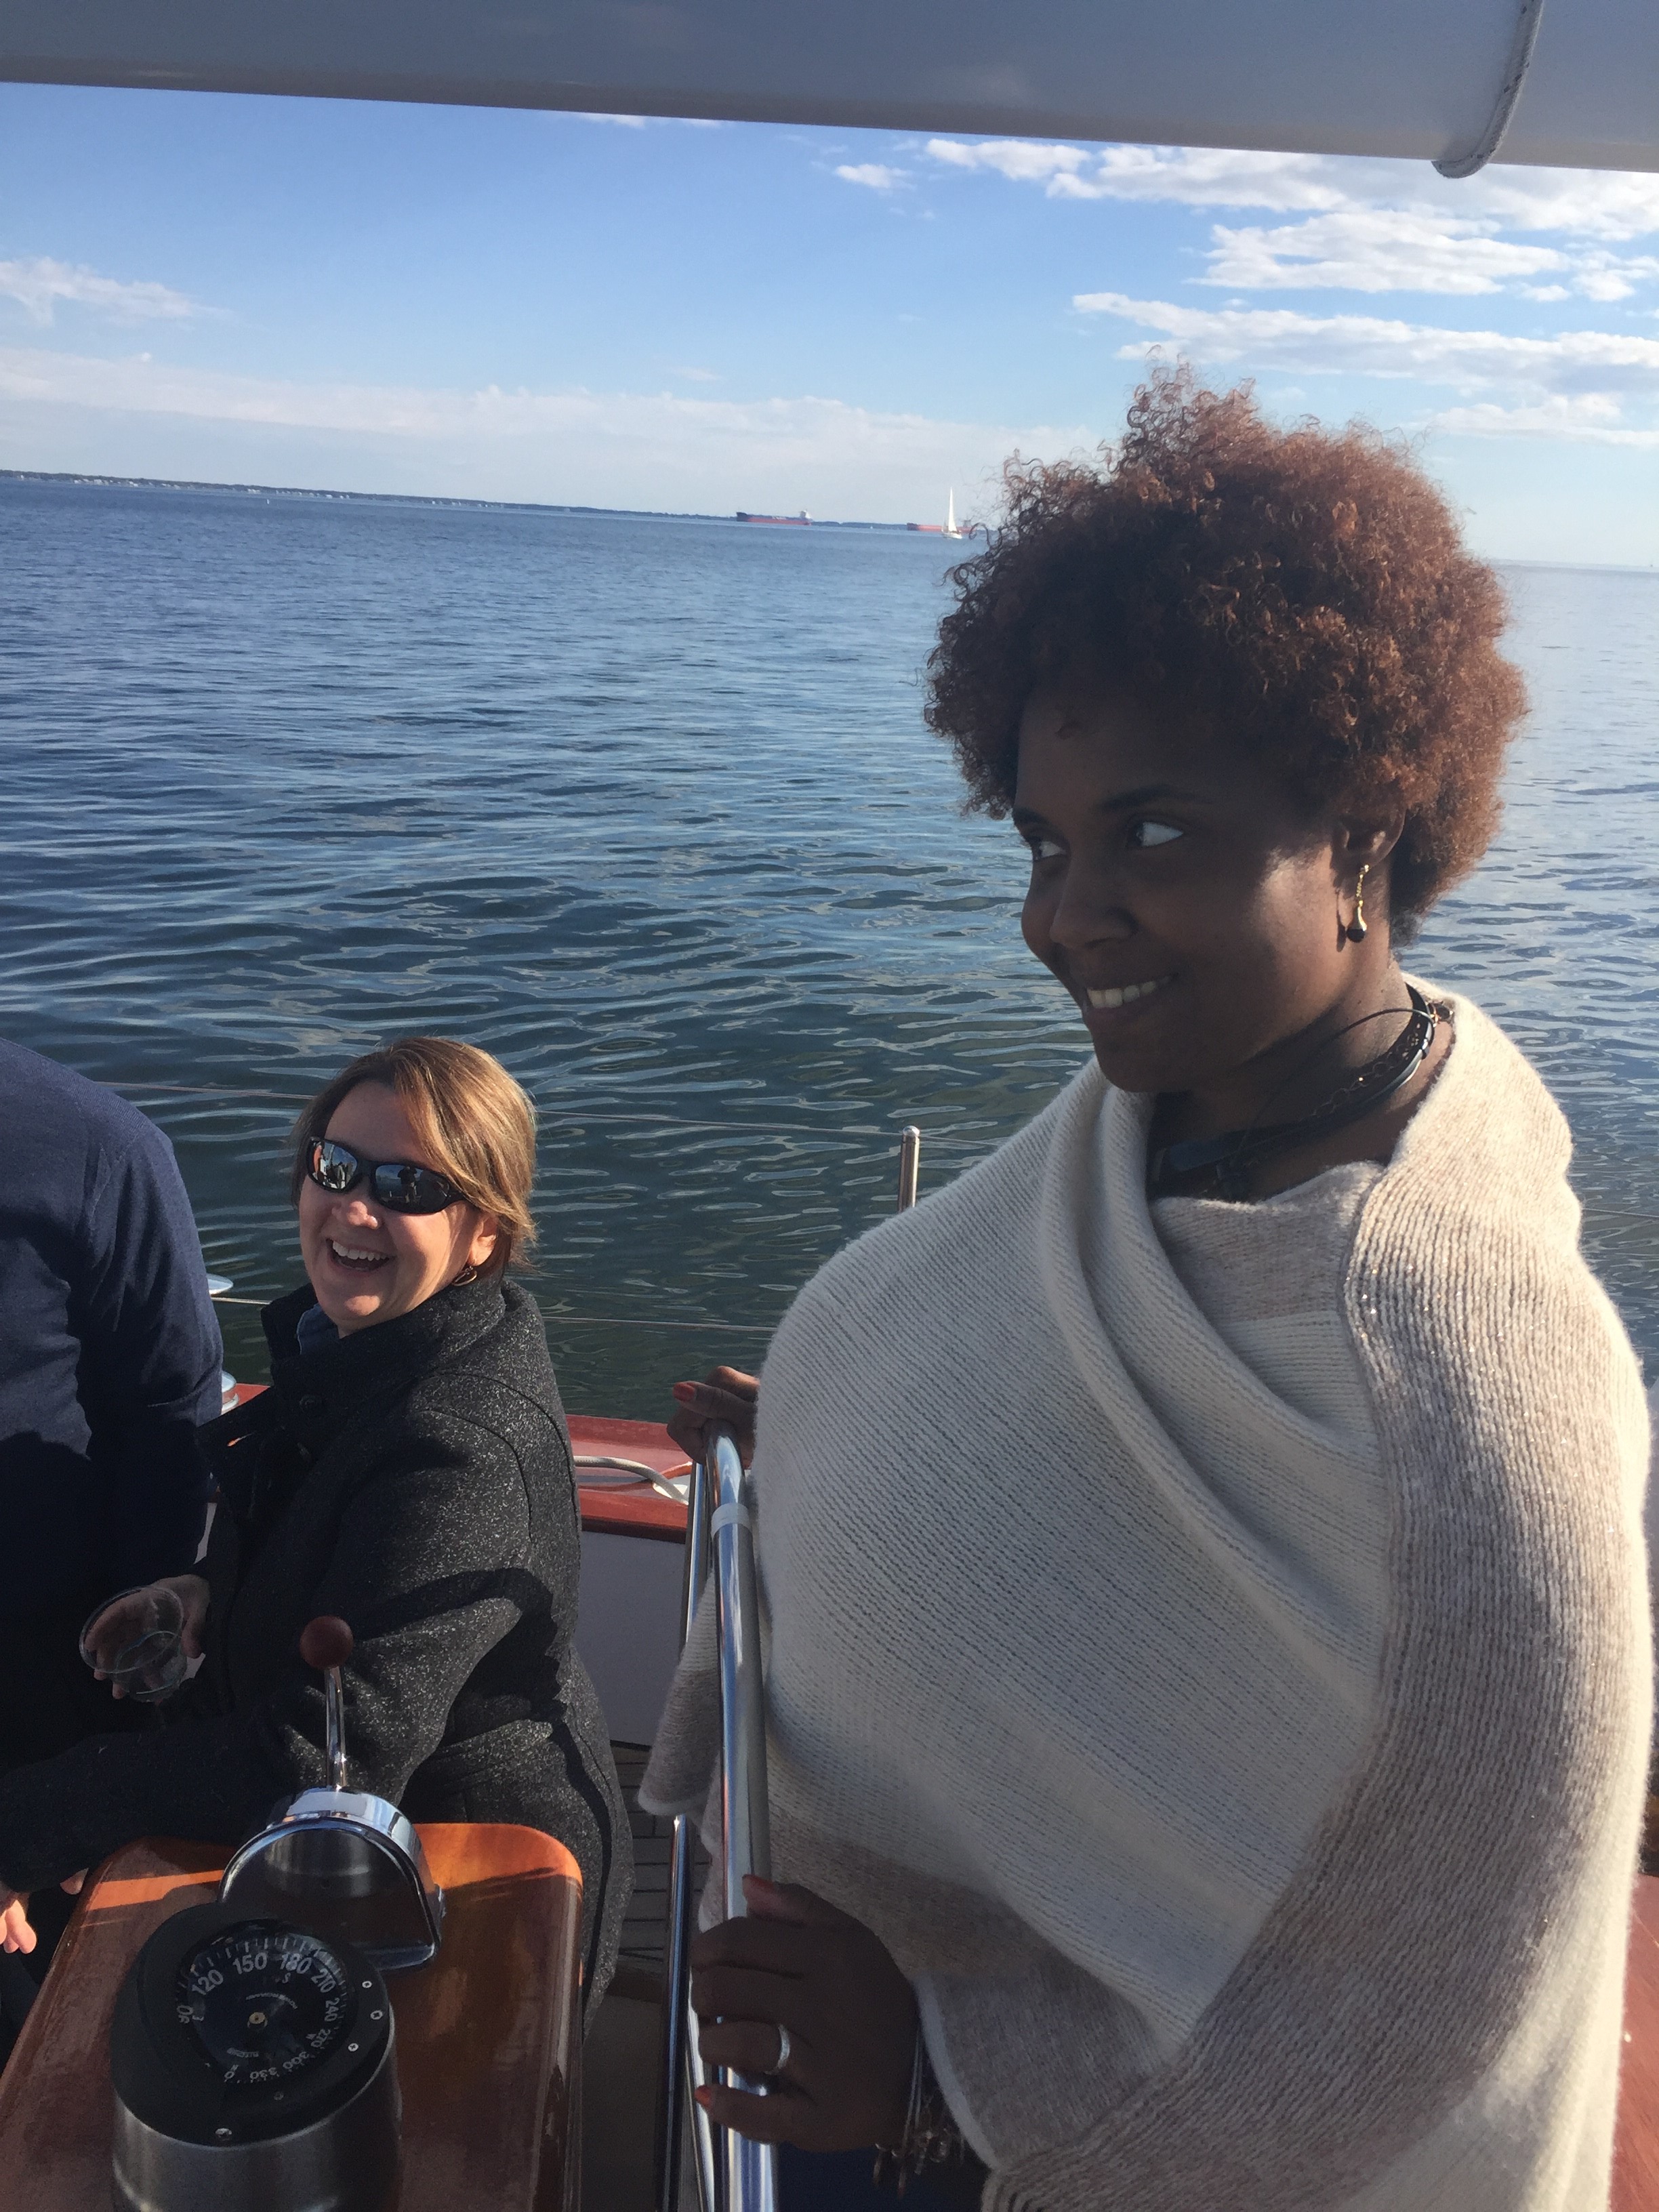 Women looking unsure about steering the big schooner with a smile